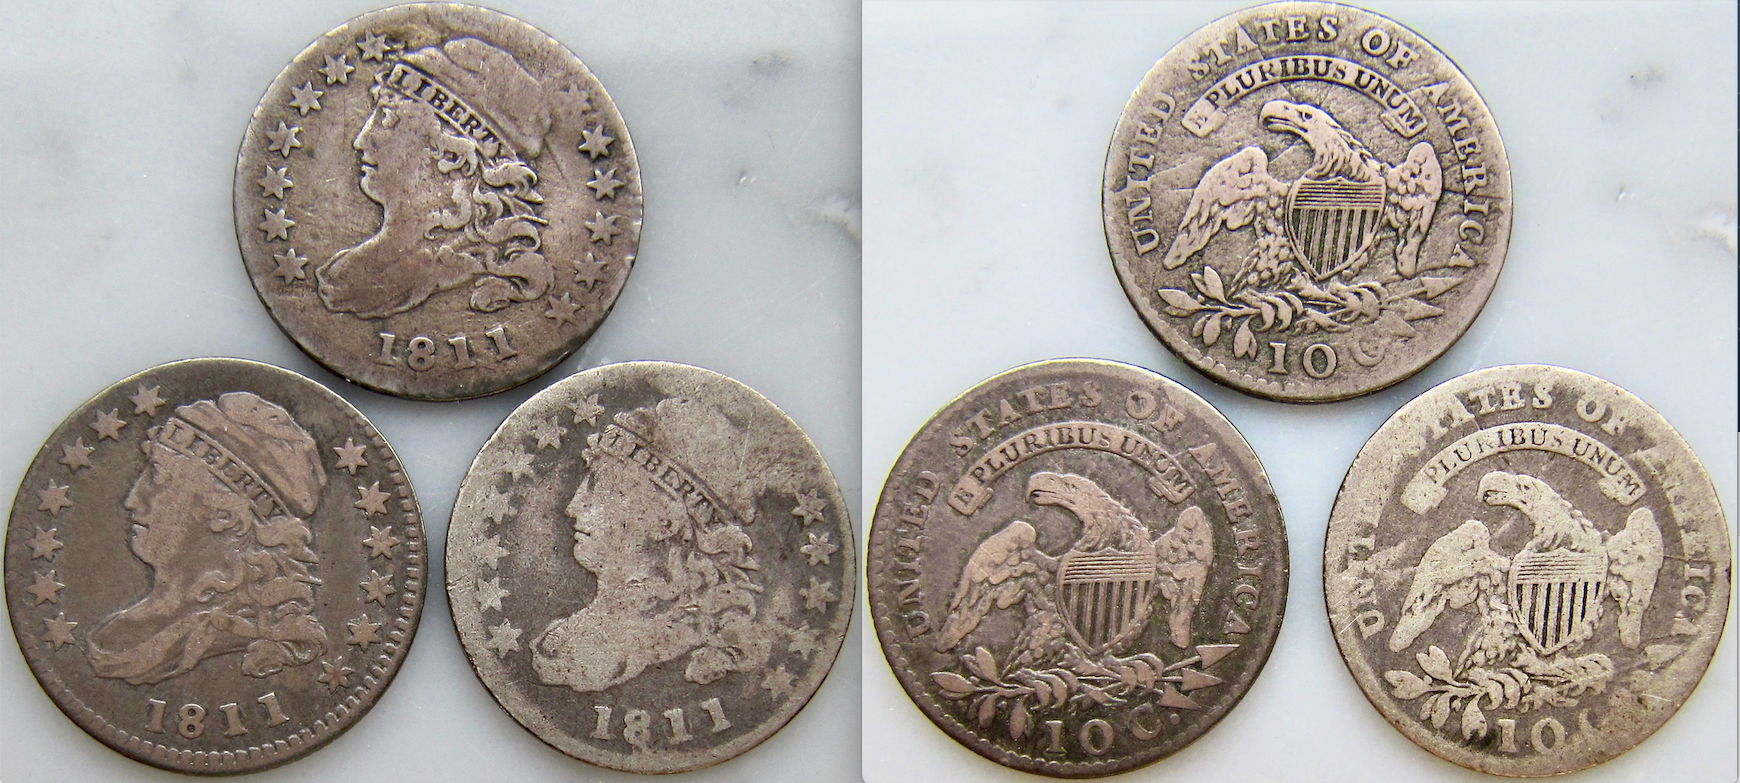 1811 Dimes - Group of 3 Three - OBV:REV - GP - 2023.png